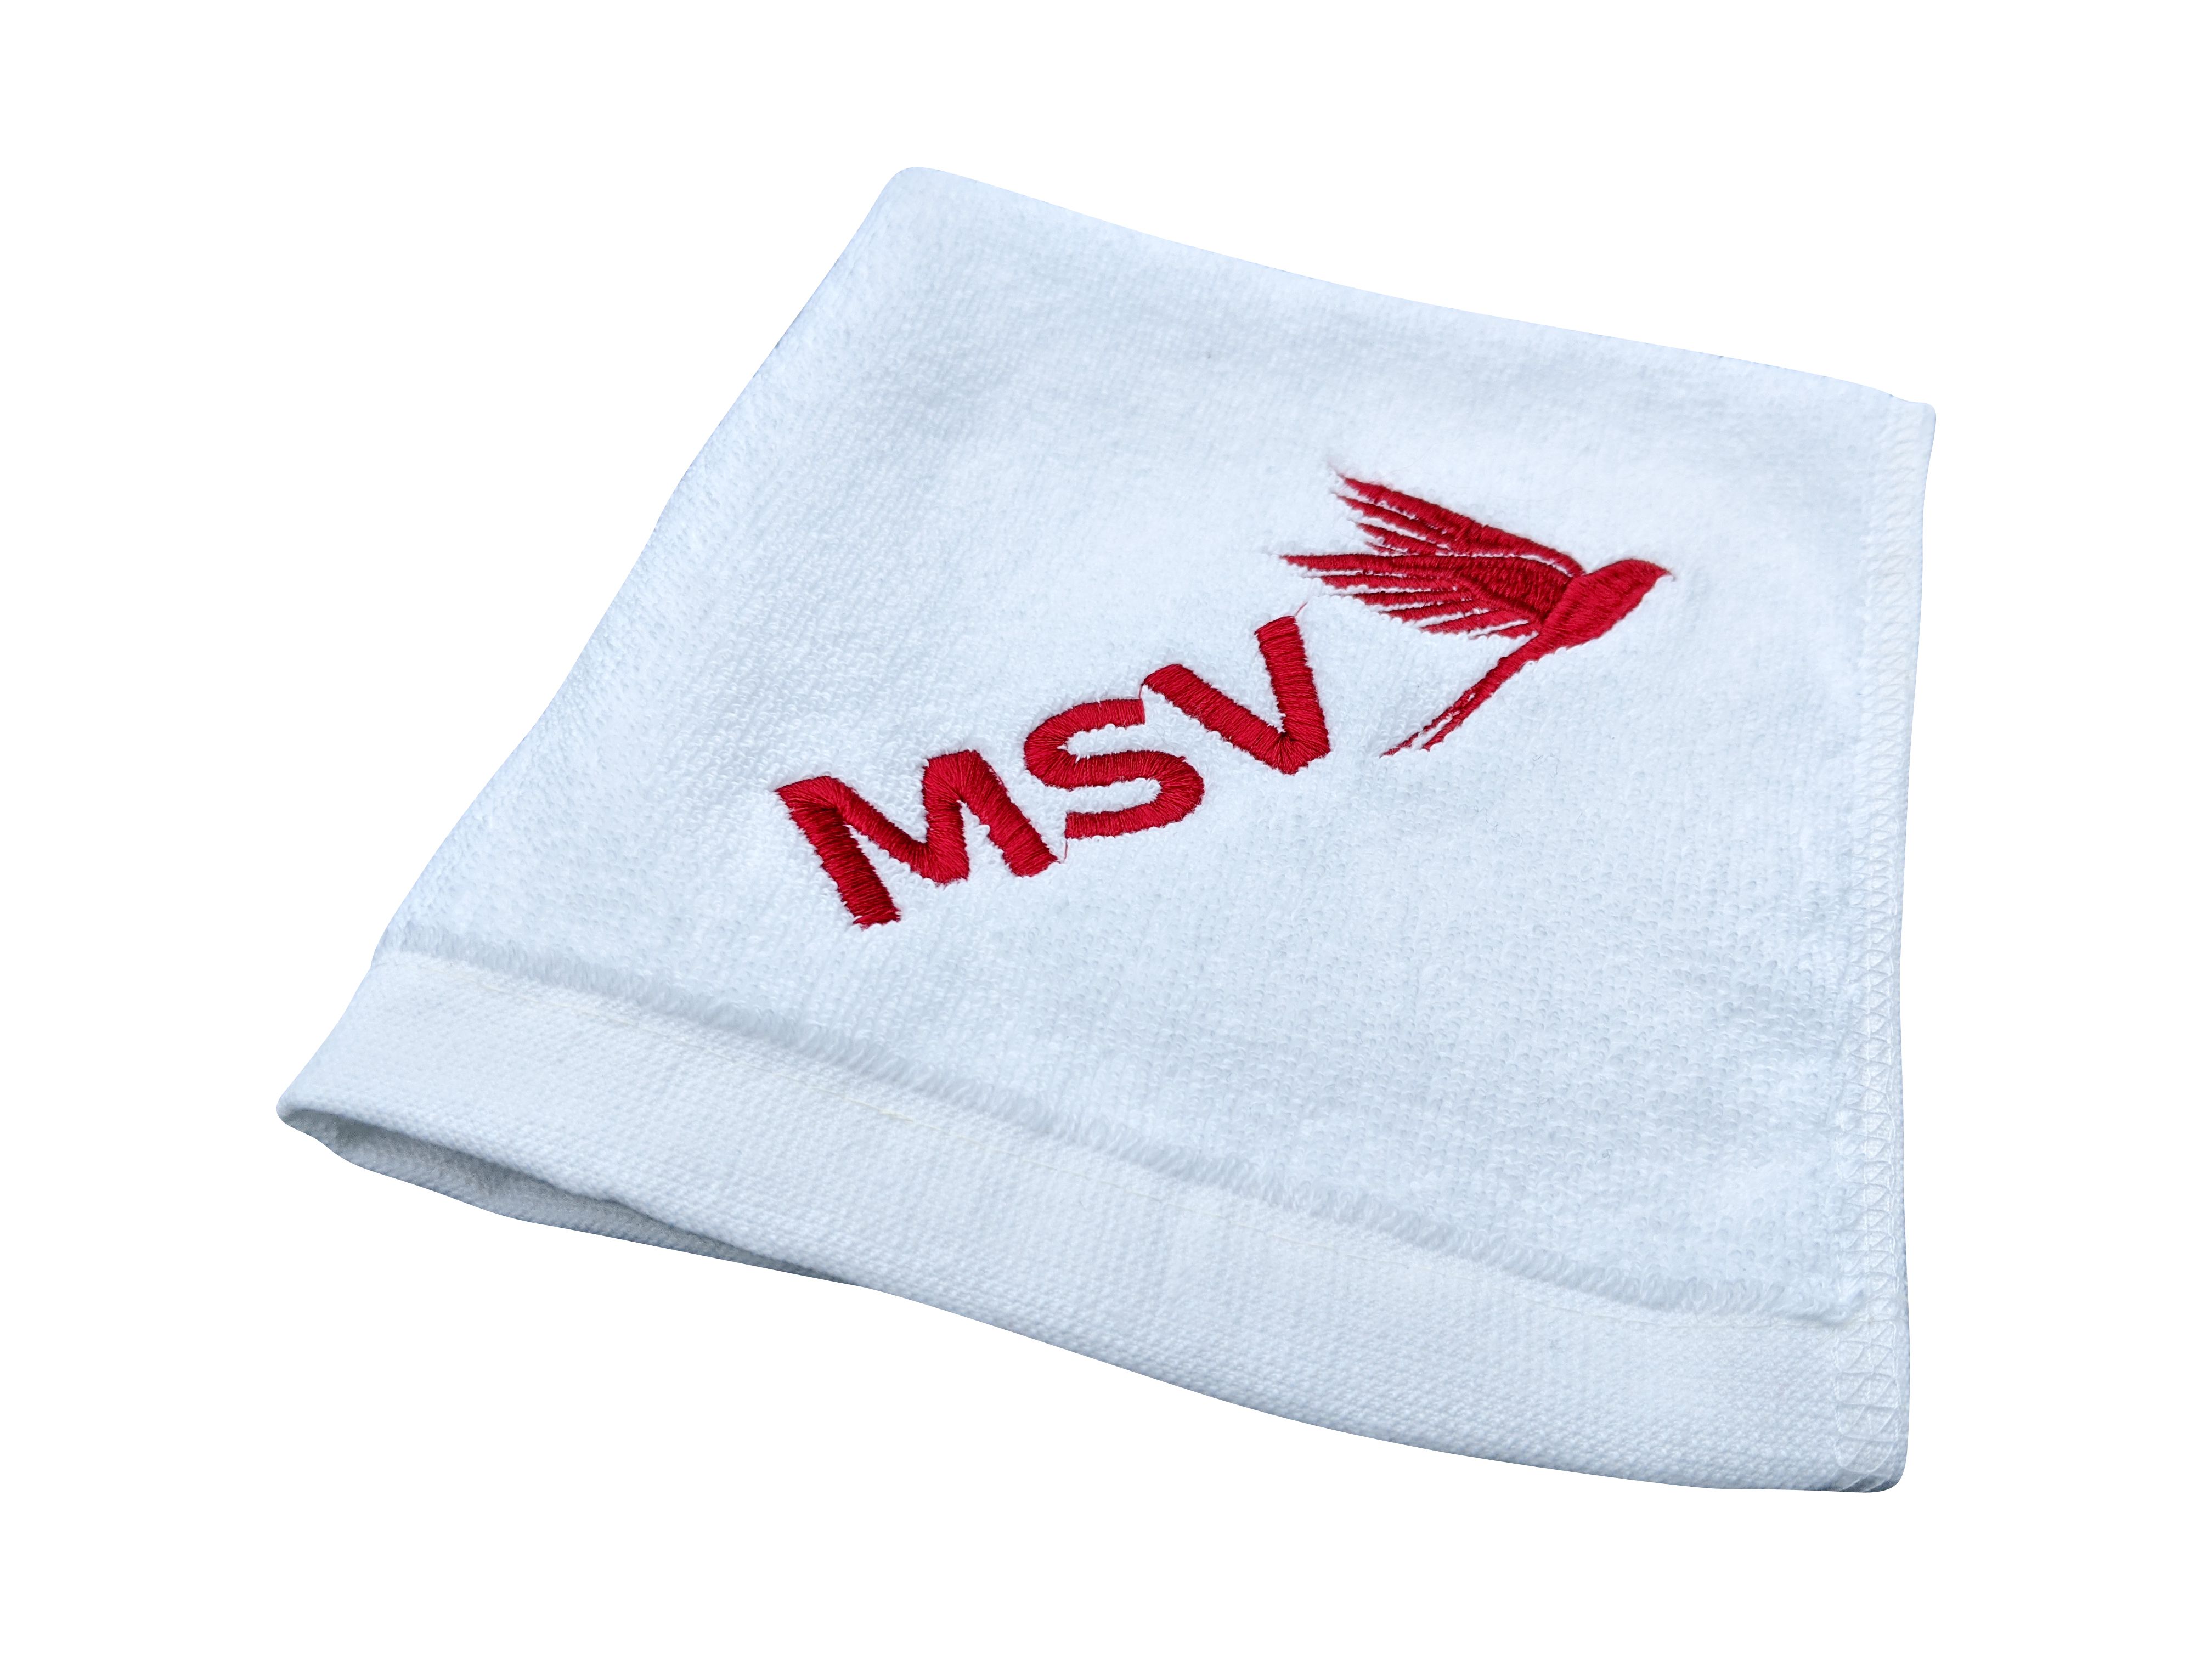 MSV Hand Towel small 35x35cm